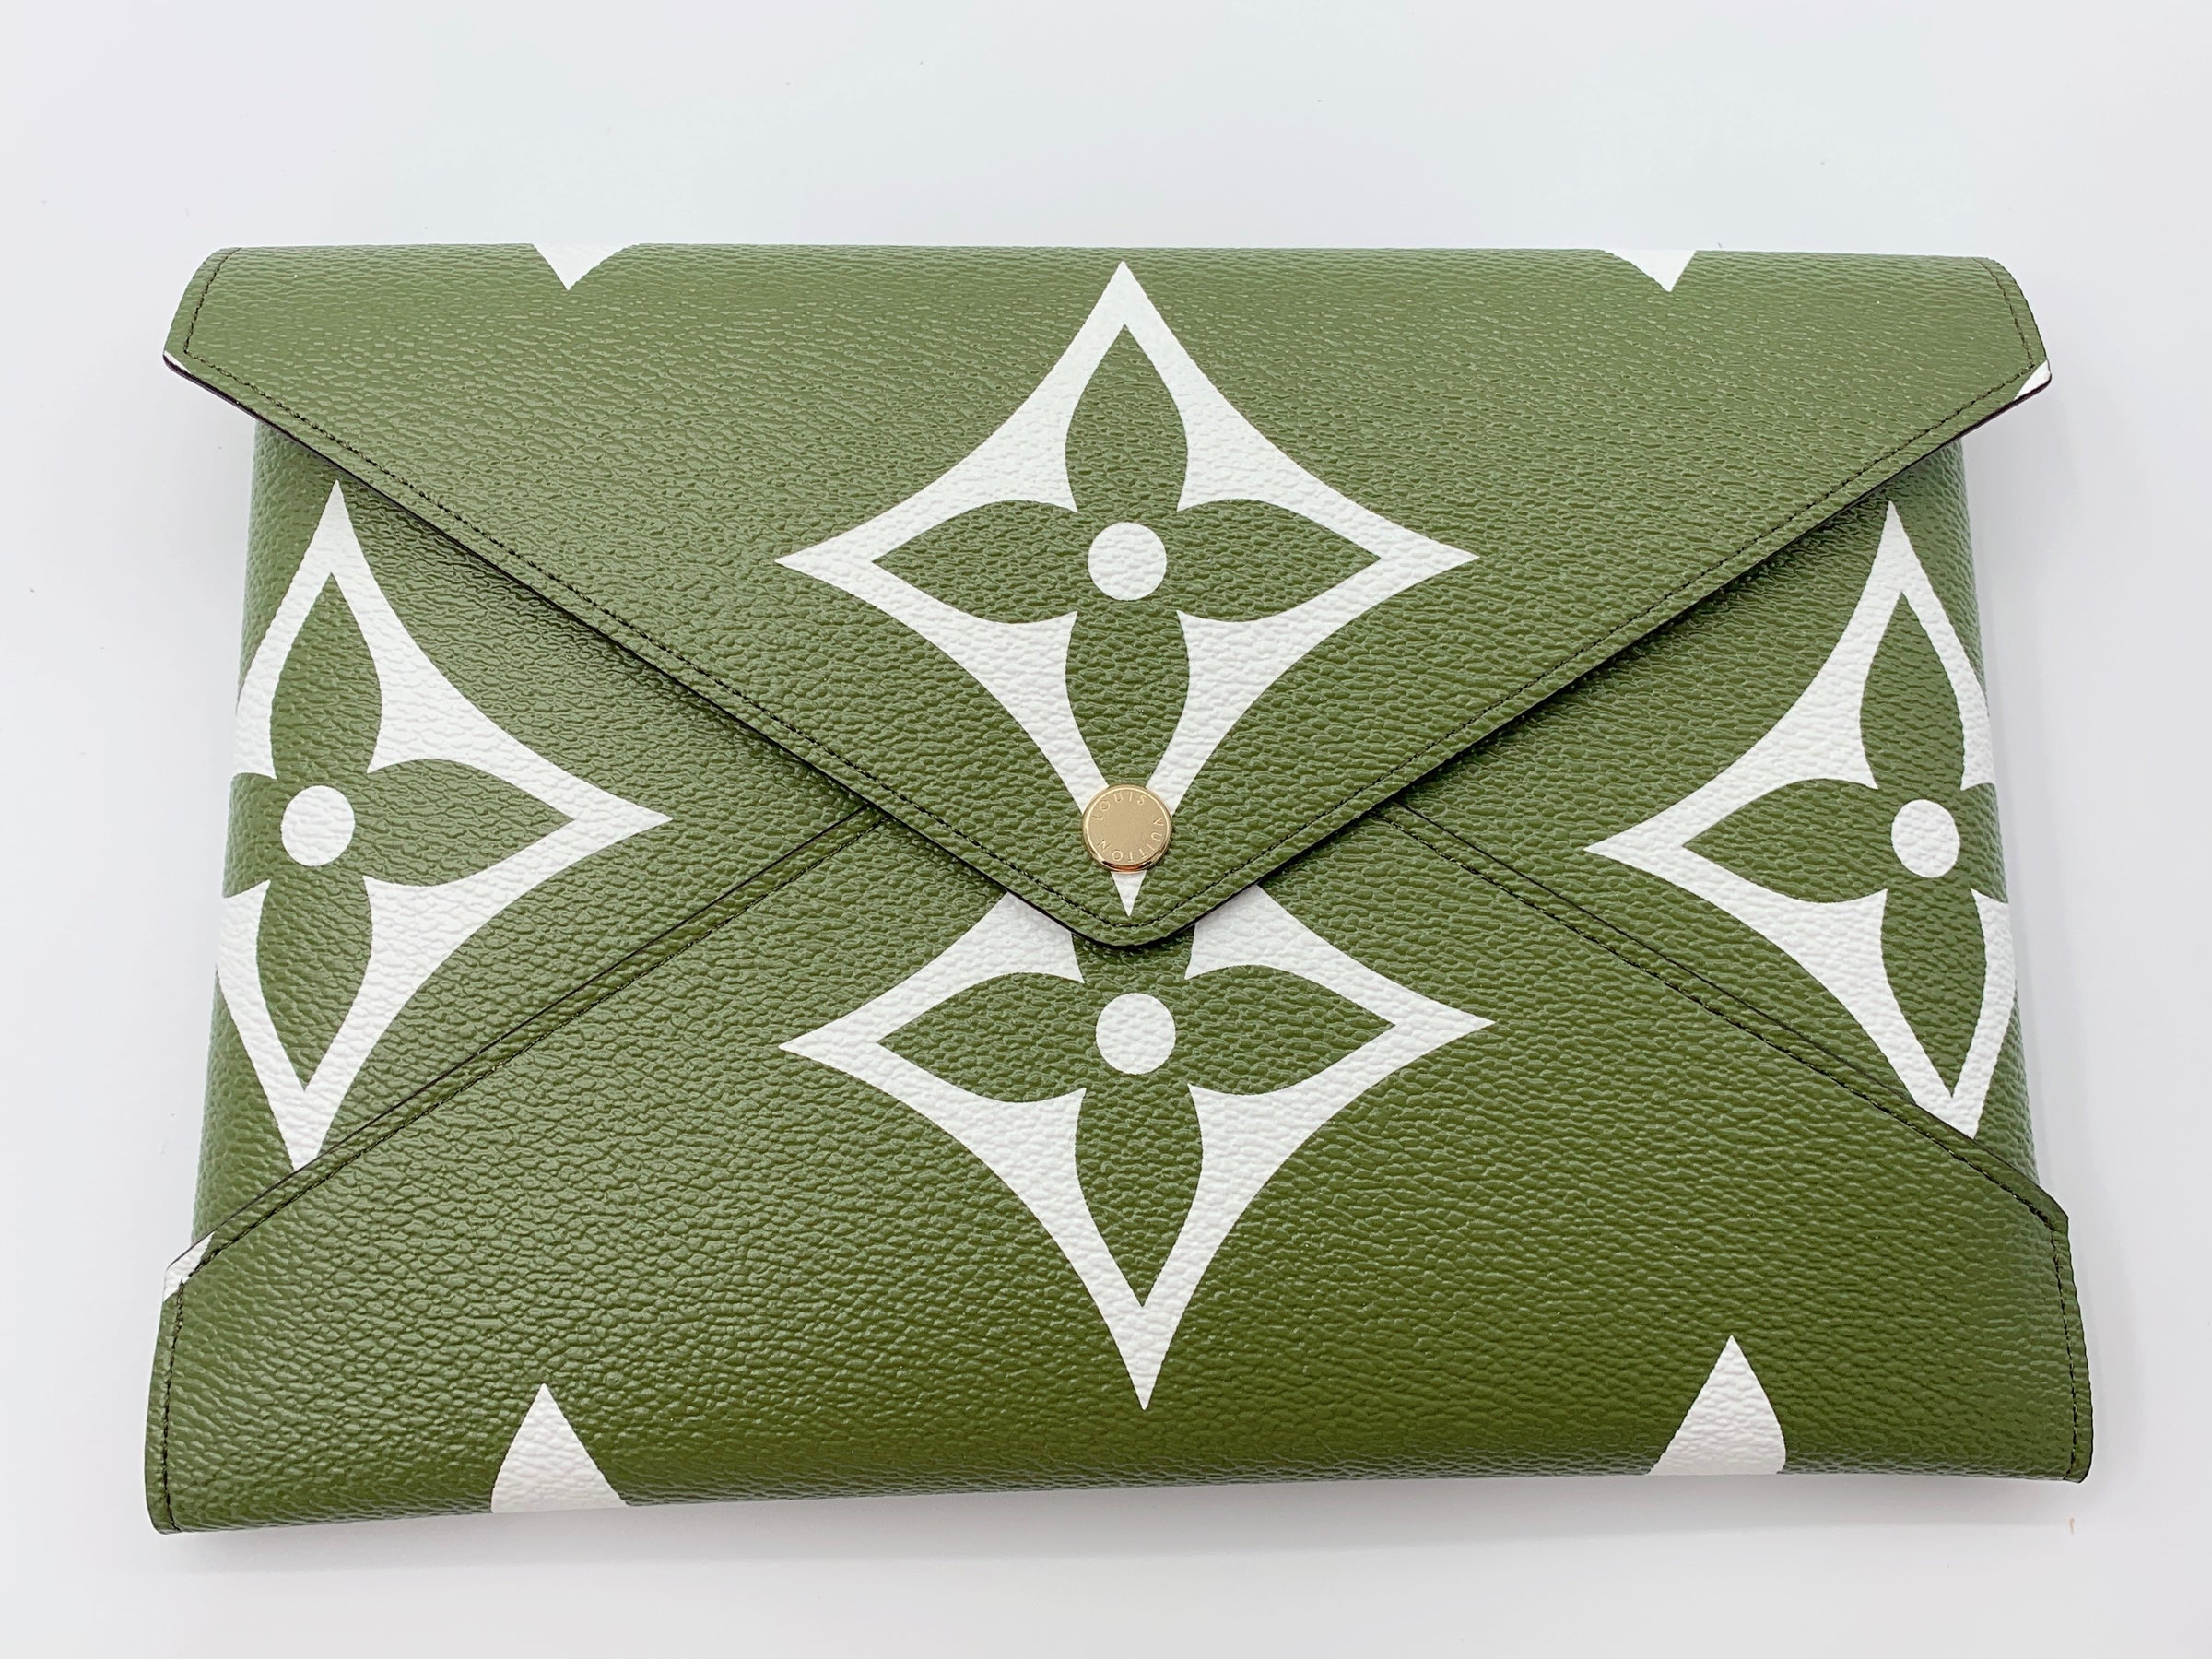 NEW LOUIS VUITTON KIRIGAMI GREEN GIANT MONOGRAM LARGE Snap Pouch With Chain  $890.00 - PicClick